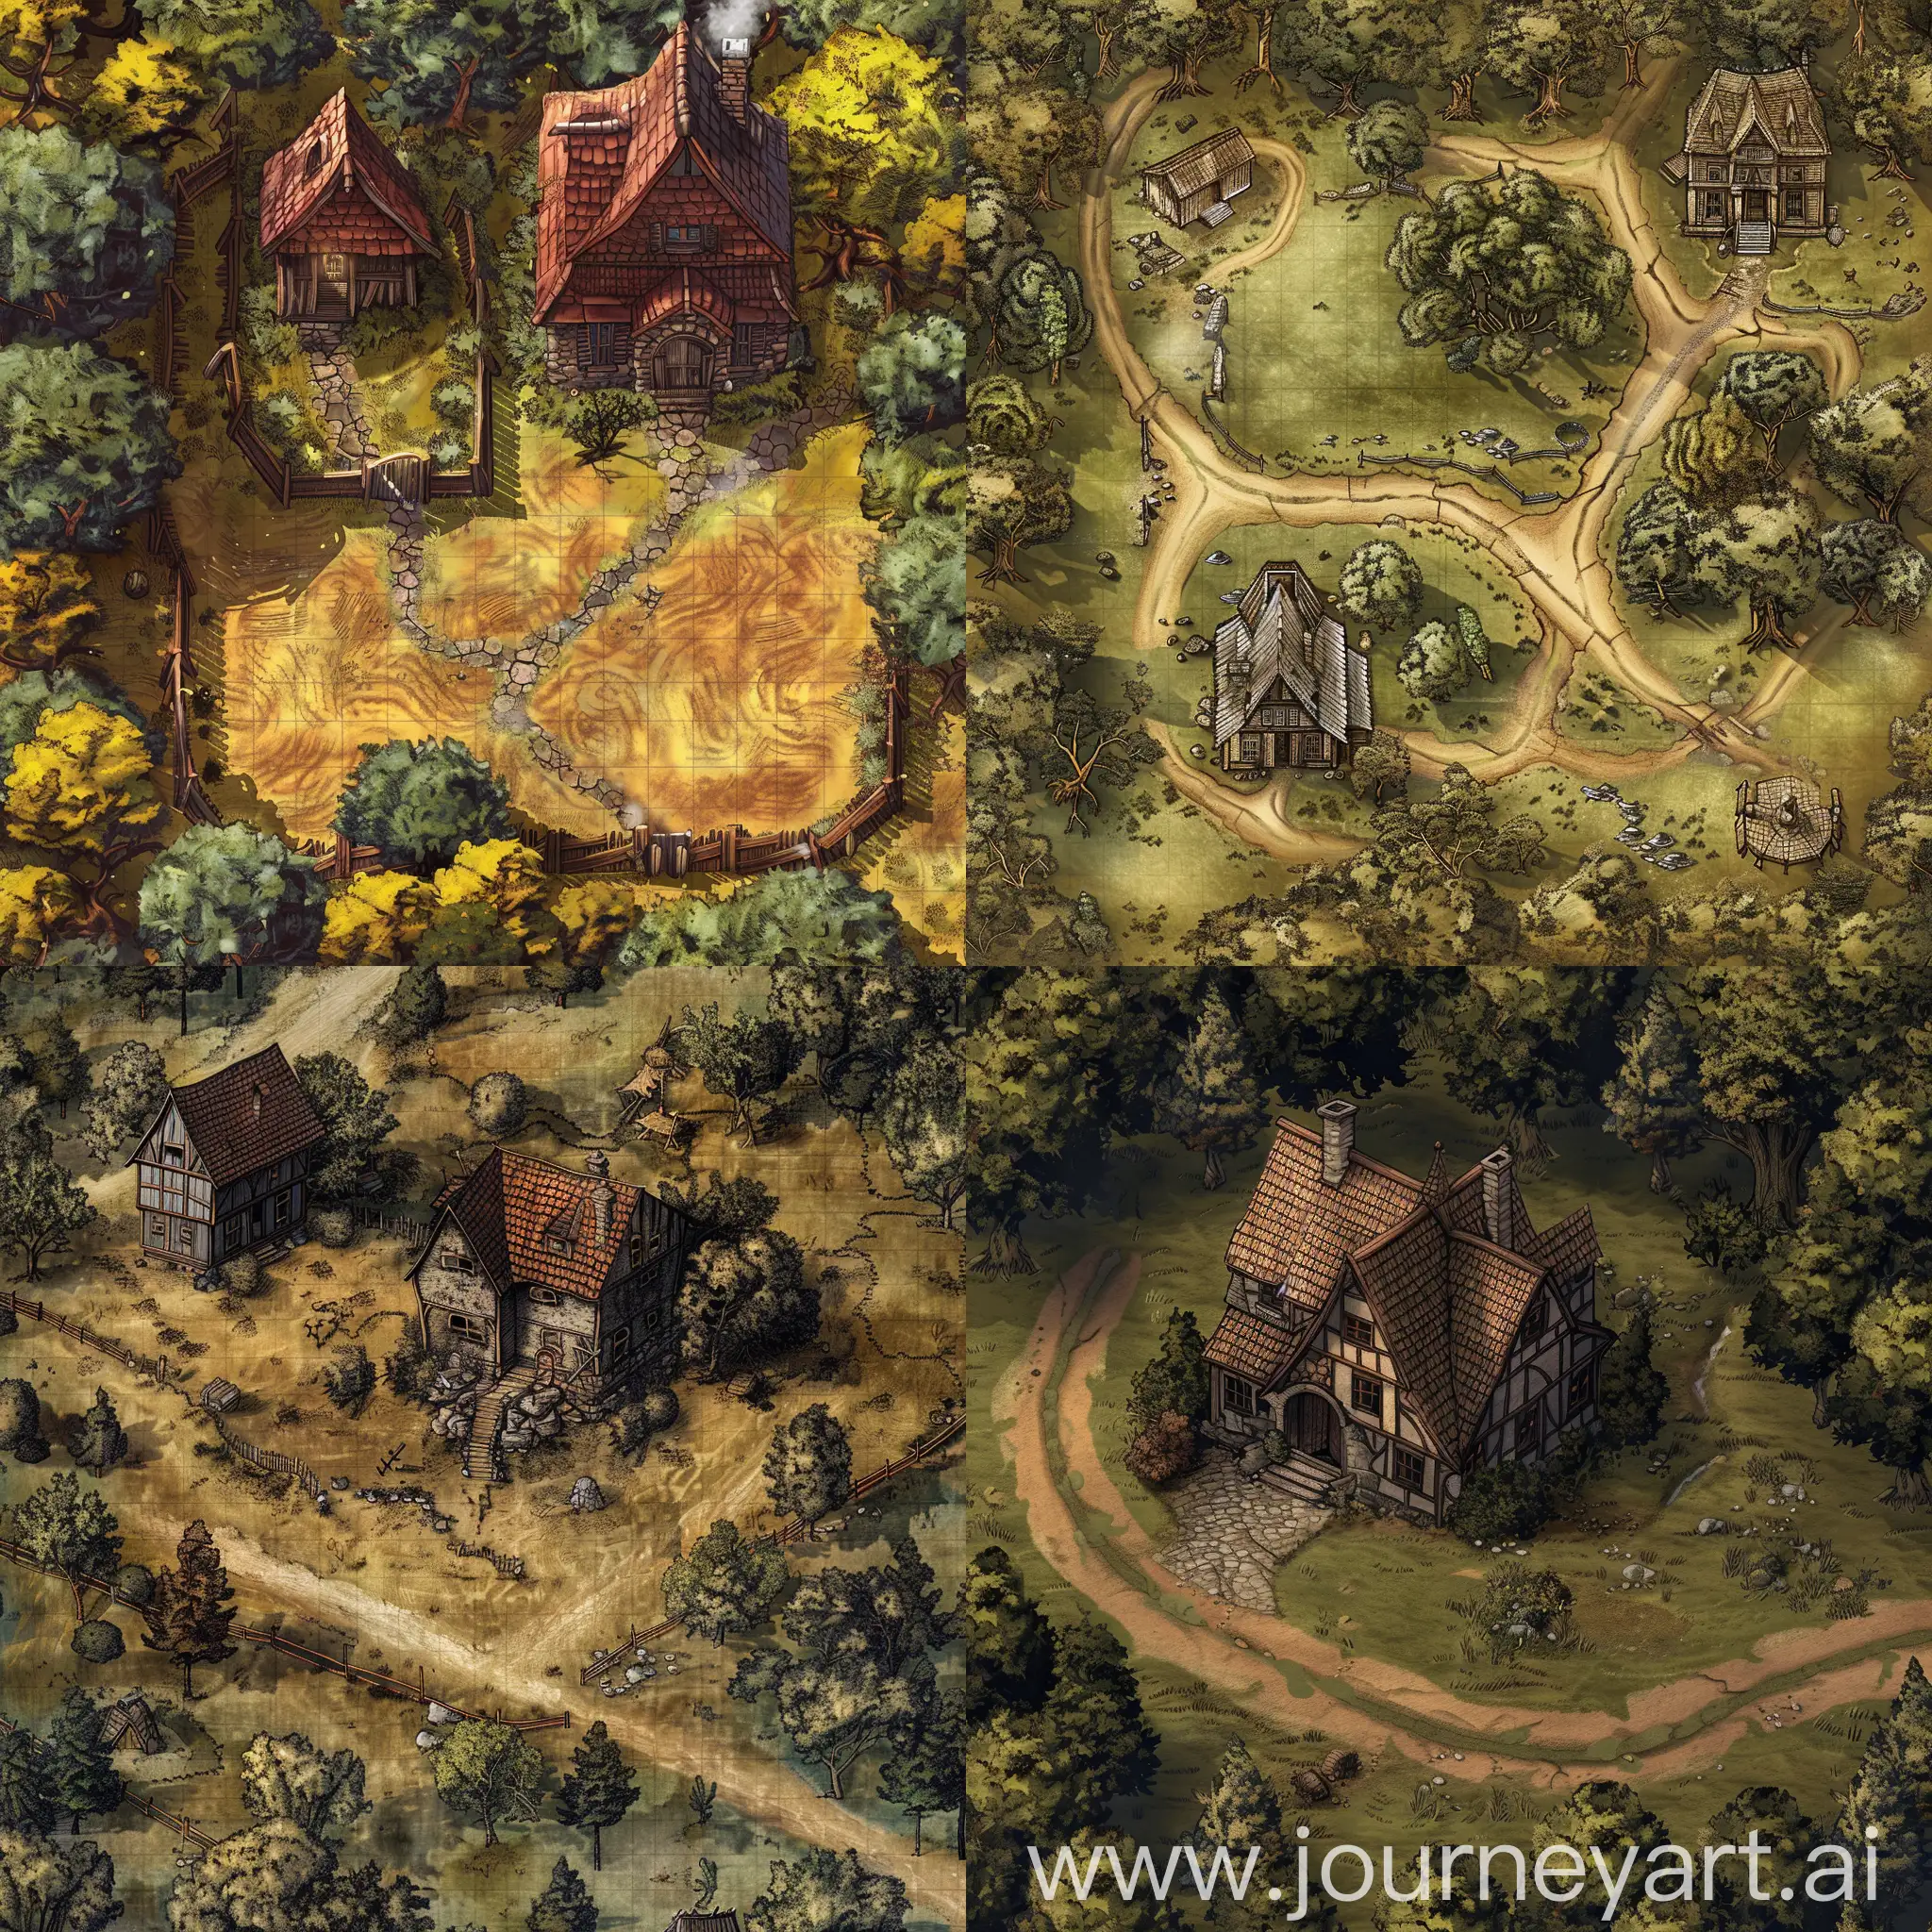 Fantasy-Dungeons-Dragons-Battle-Map-Enchanted-Old-House-Amidst-Lush-Fields